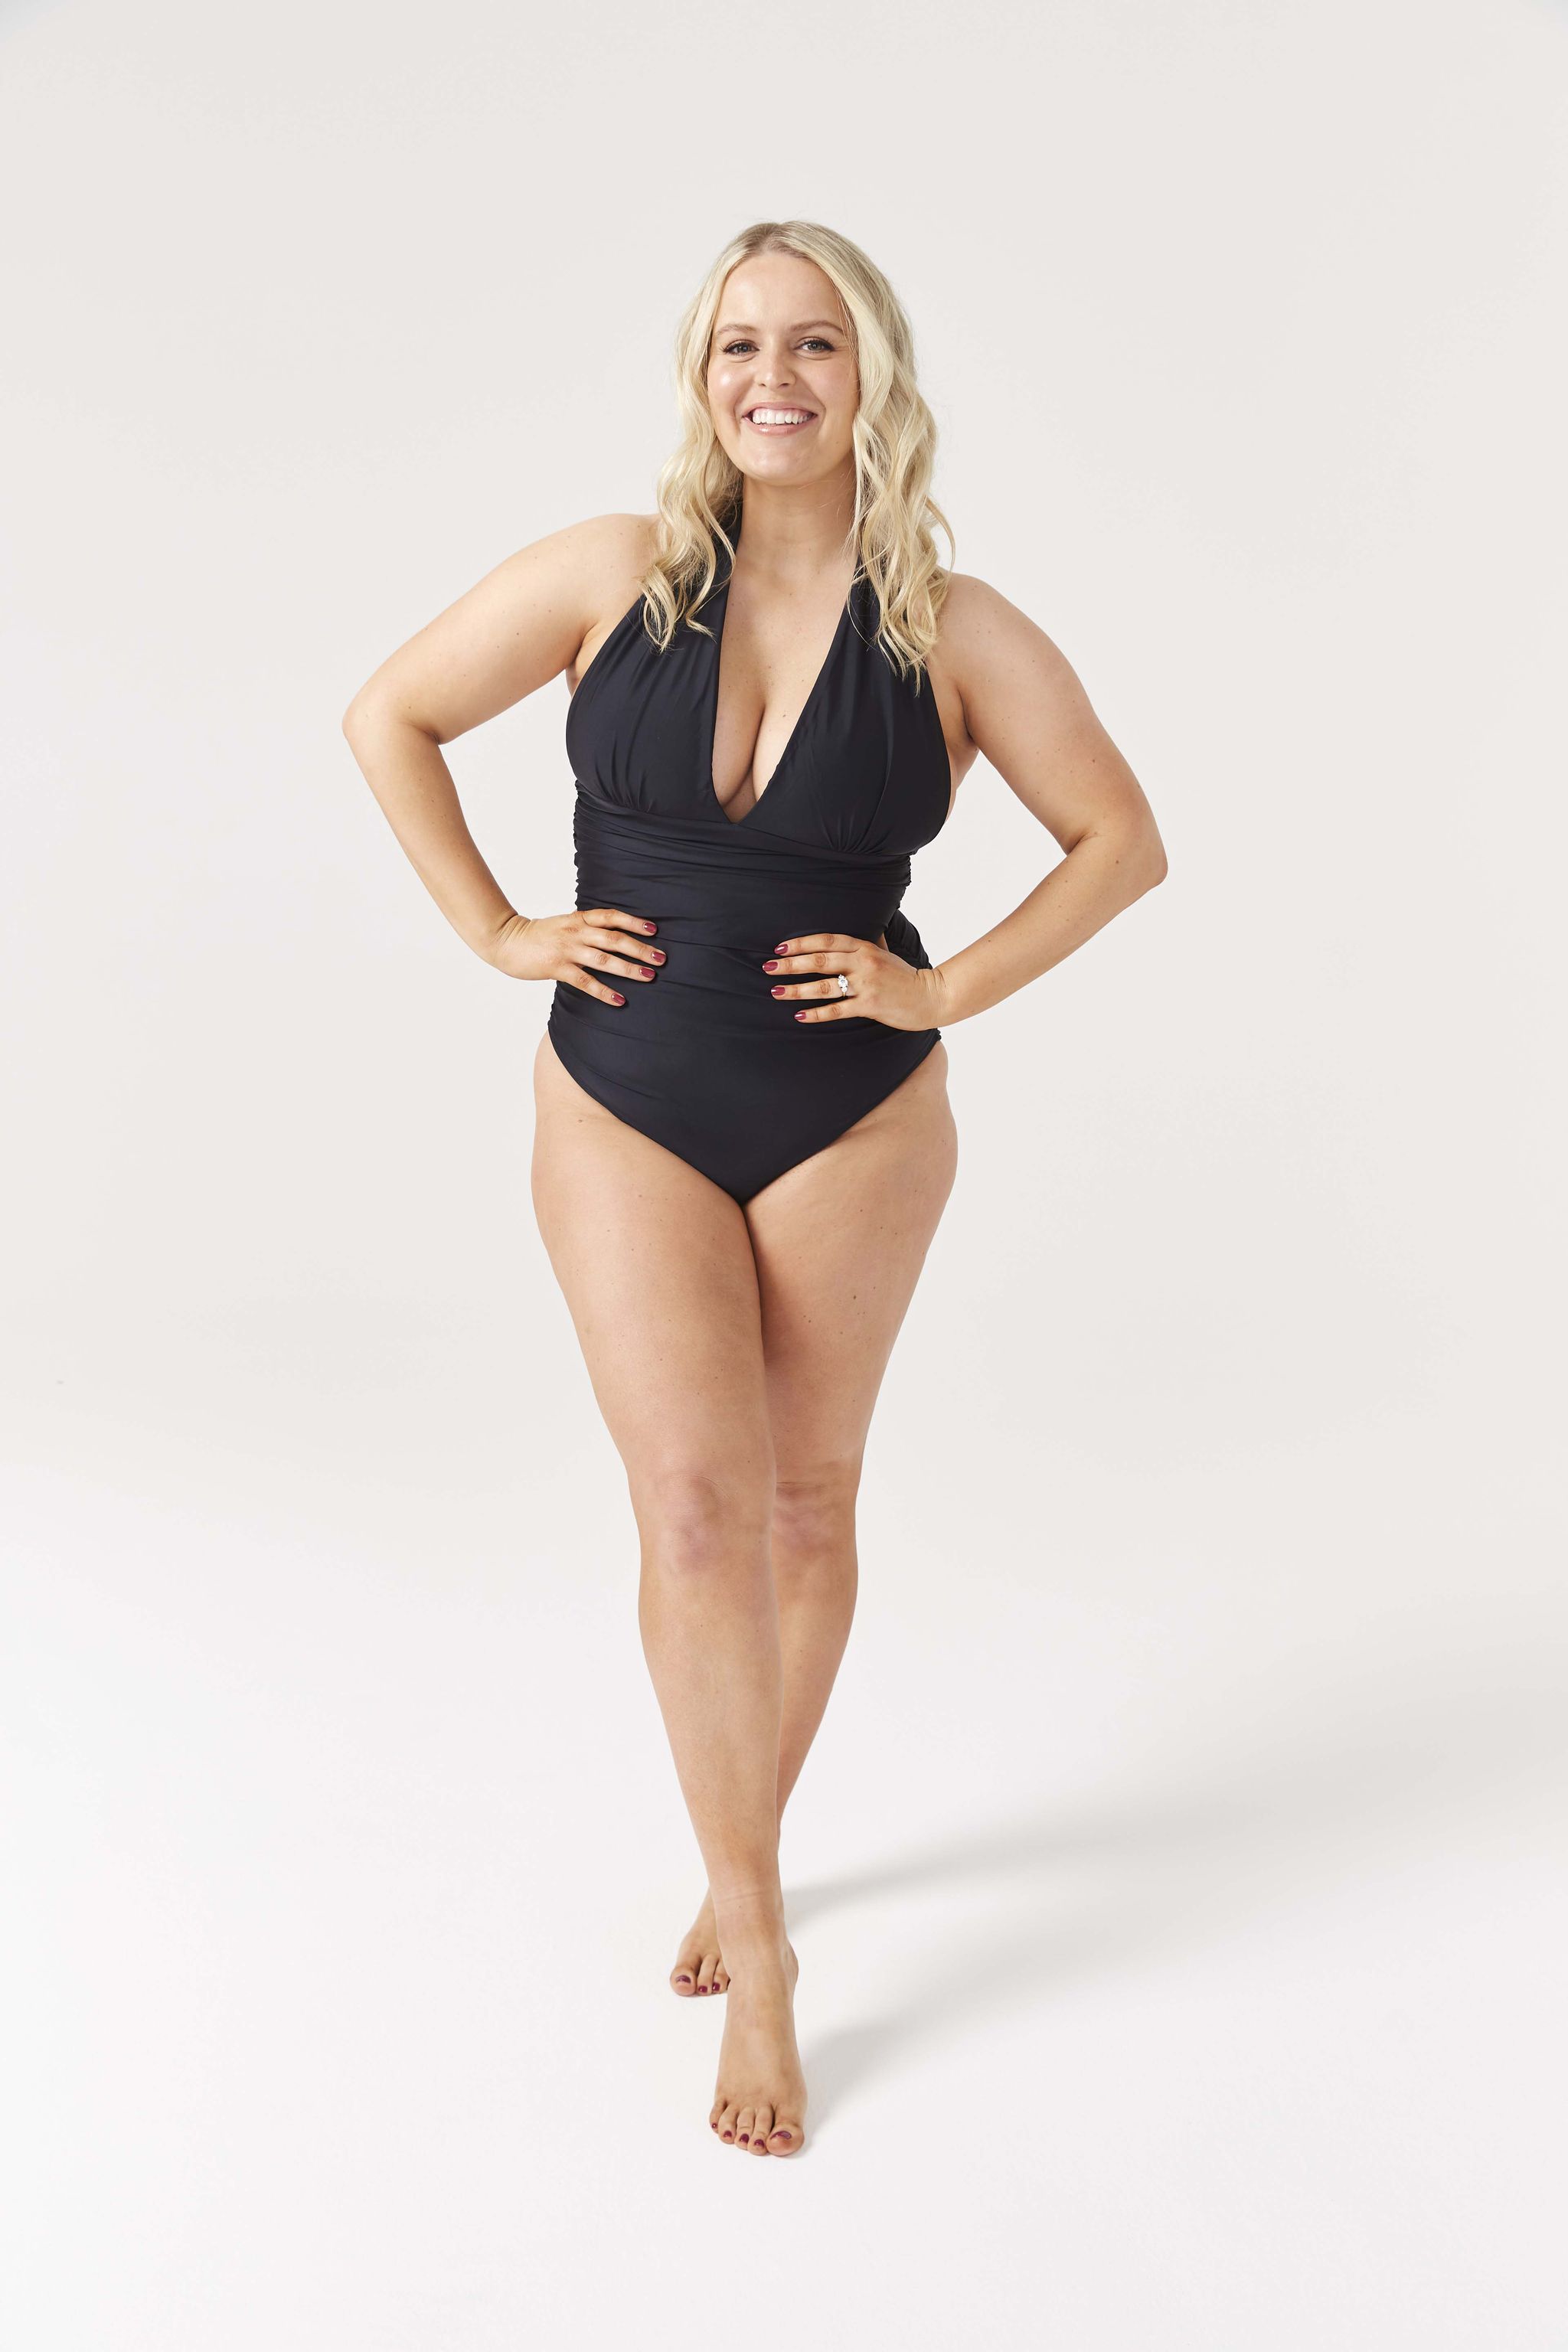 Body-positive influencer Alex Light launches swimsuit collection